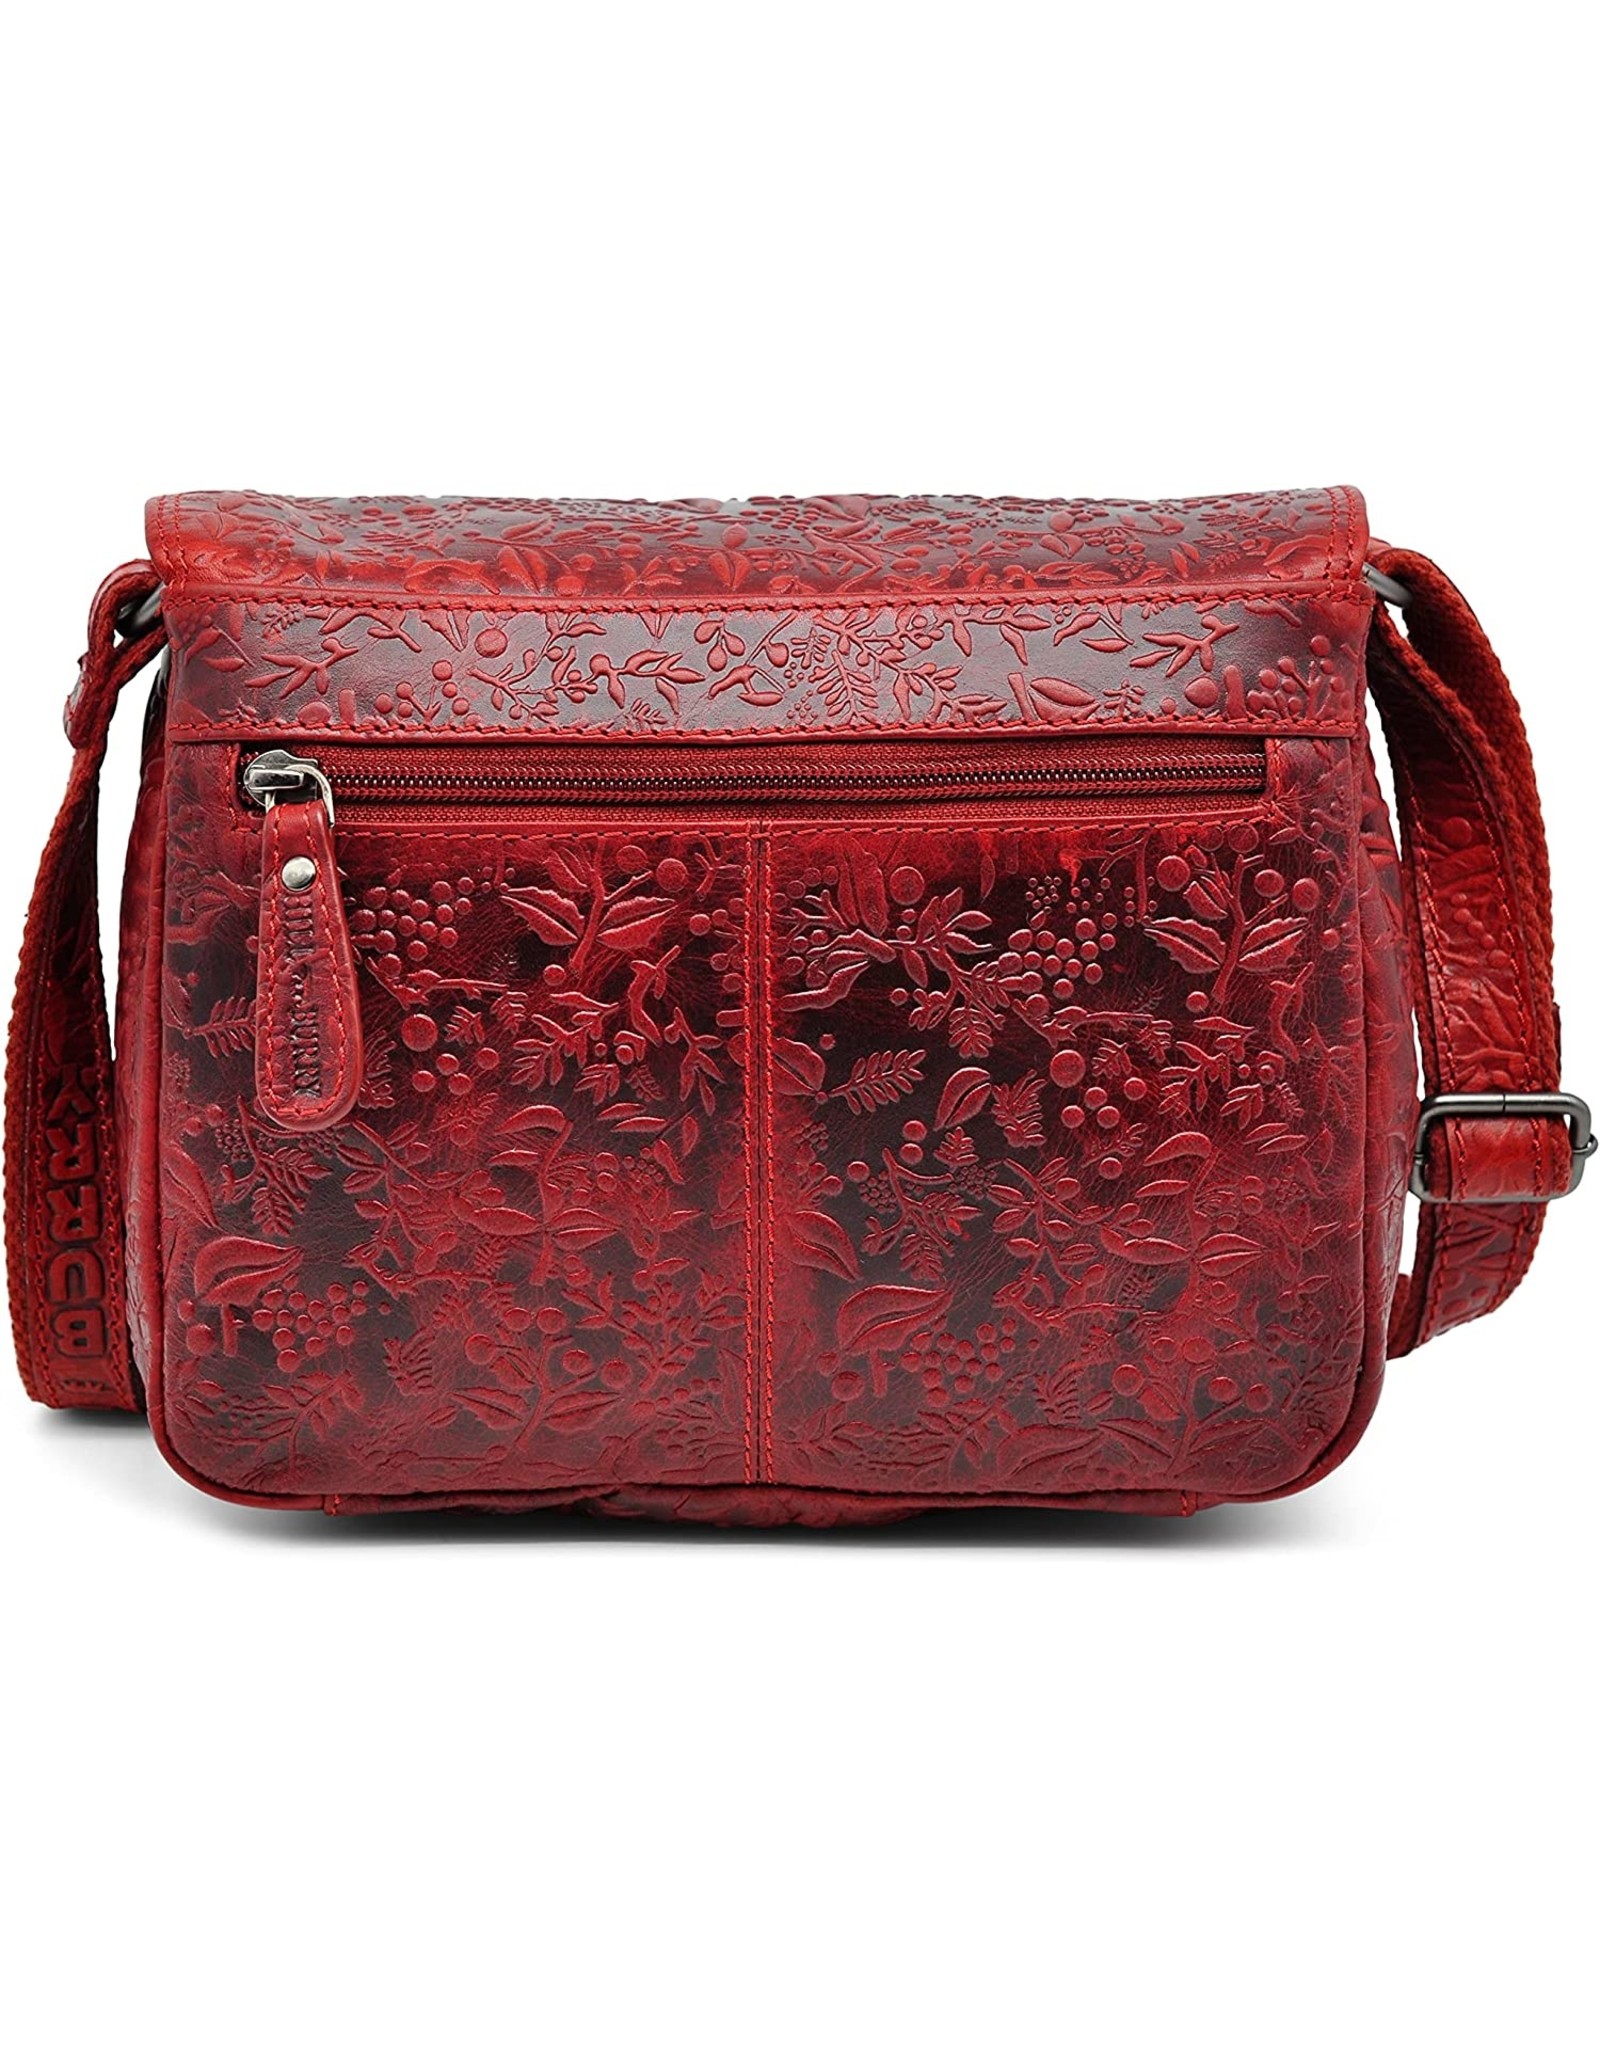 HillBurry Leather bags - Hillburry Shoulder bag with Embossed Leafs red